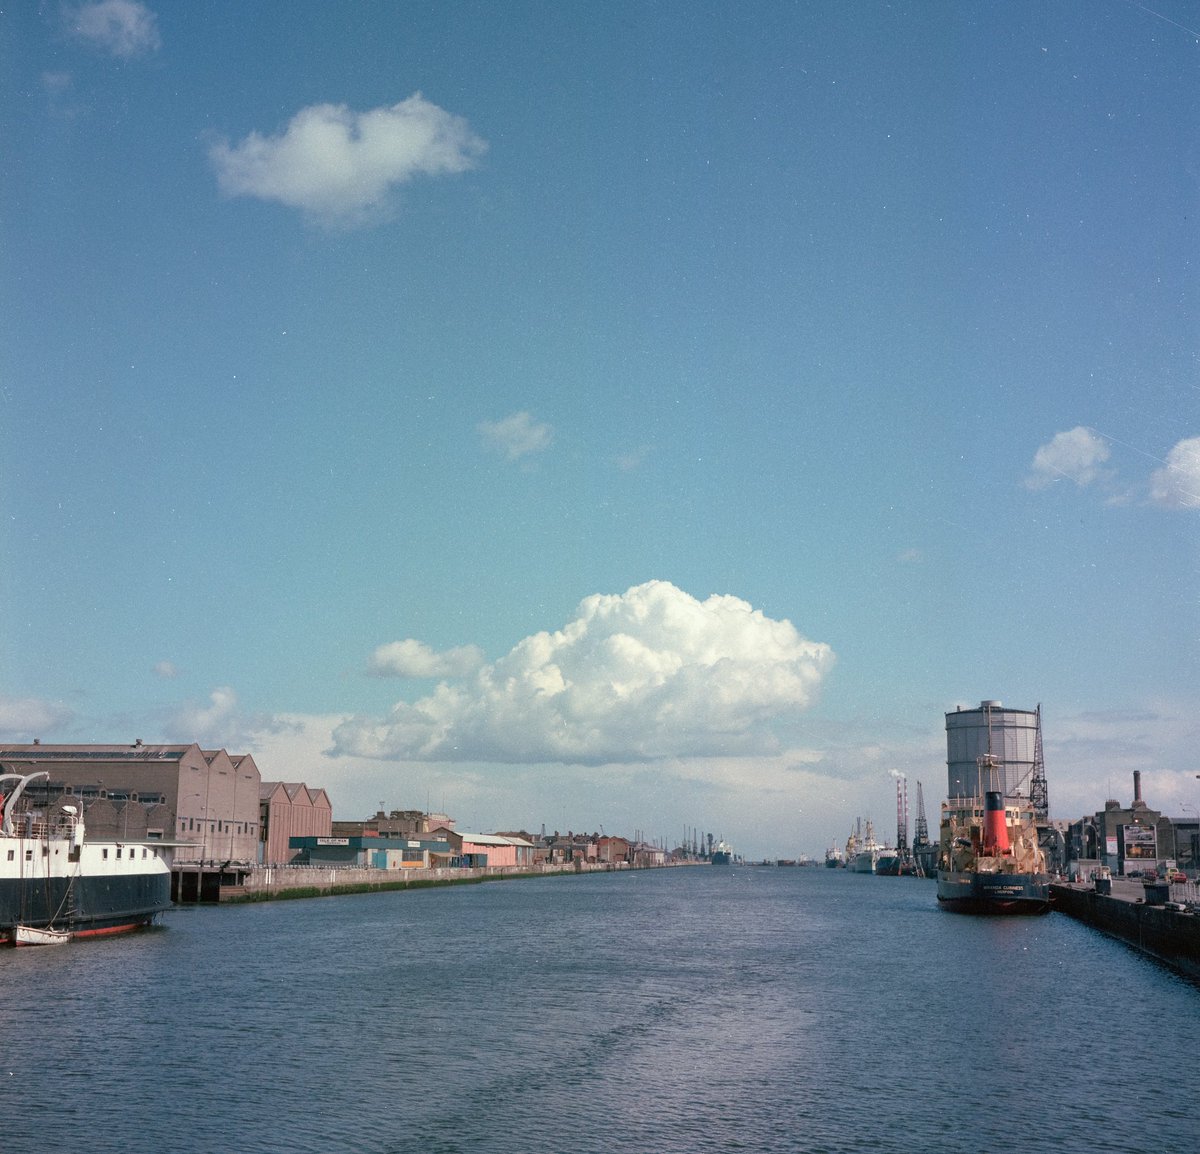 Ships on the Liffey, Dublin, April 1984 From #DublinBeforeTheTiger Best series about Dublin before the boom! For more, please FOLLOW & REPOST. For ltd. edition PRINTS: email in header. @photosofdublin @OldDublinTown @IBN_Berlin